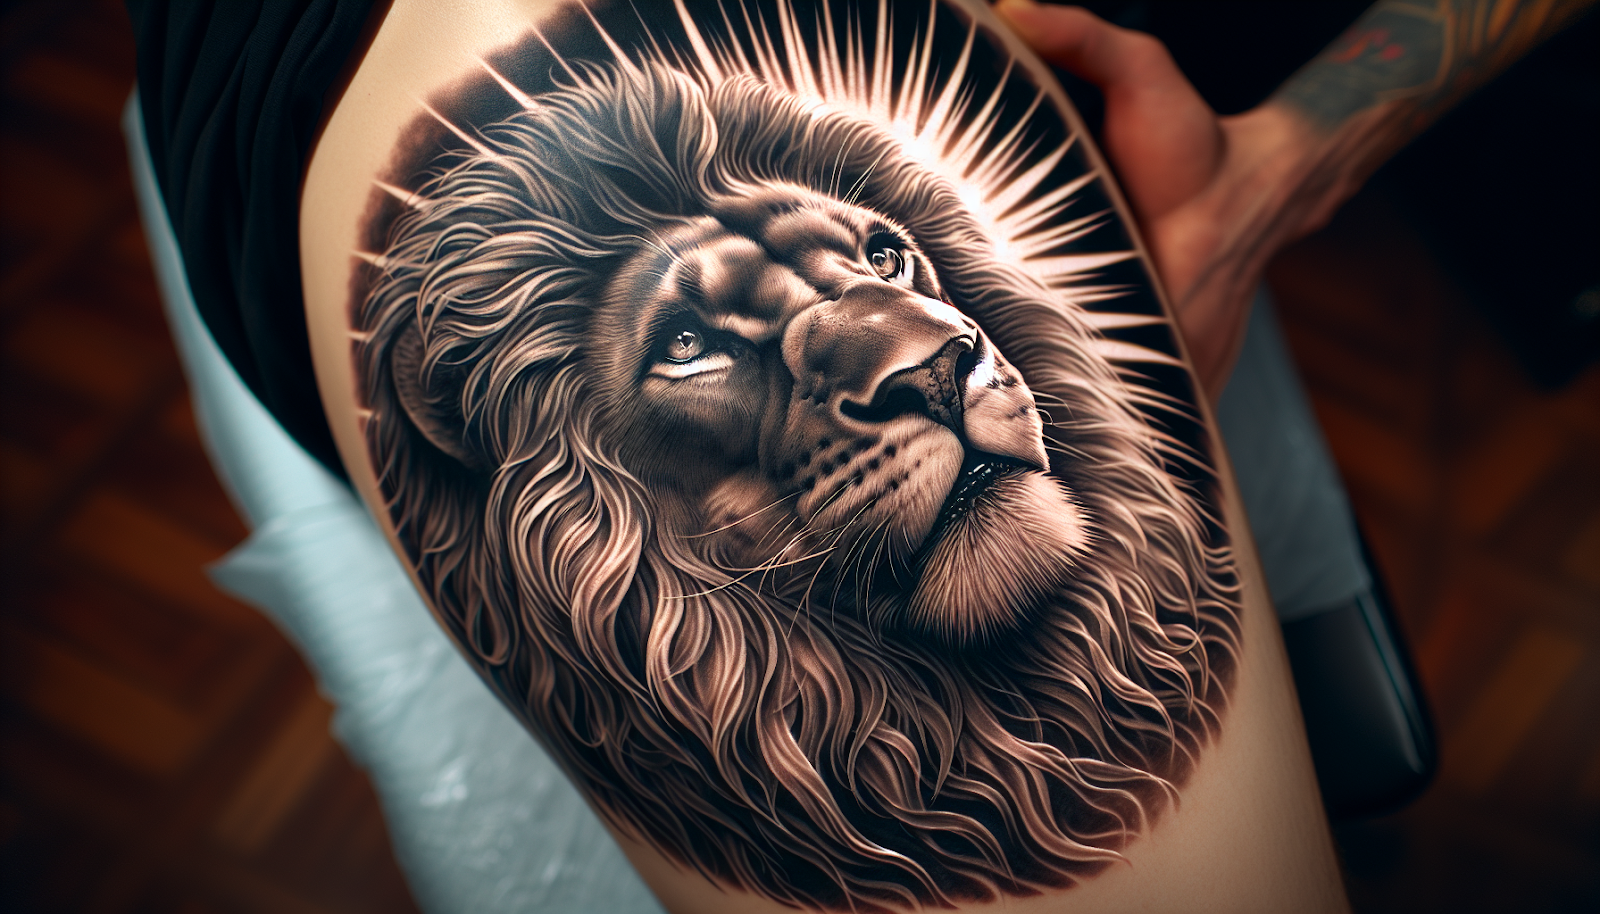 Micro-realism style animal tattoo representing personal significance